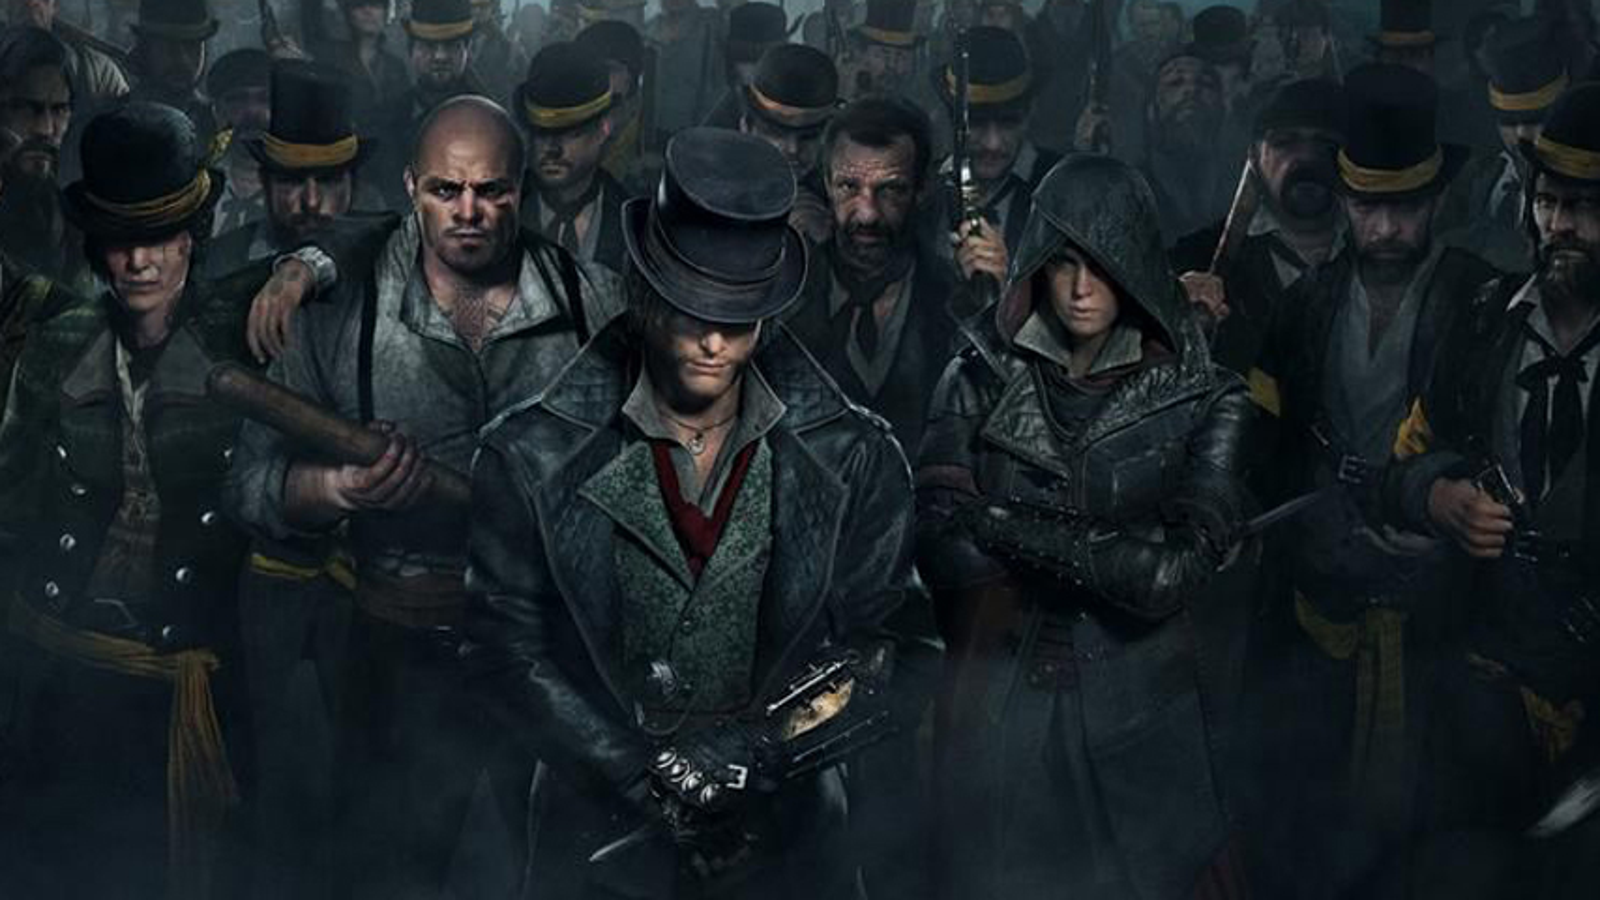 World War 1 - Assassin's Creed Syndicate Guide - IGN